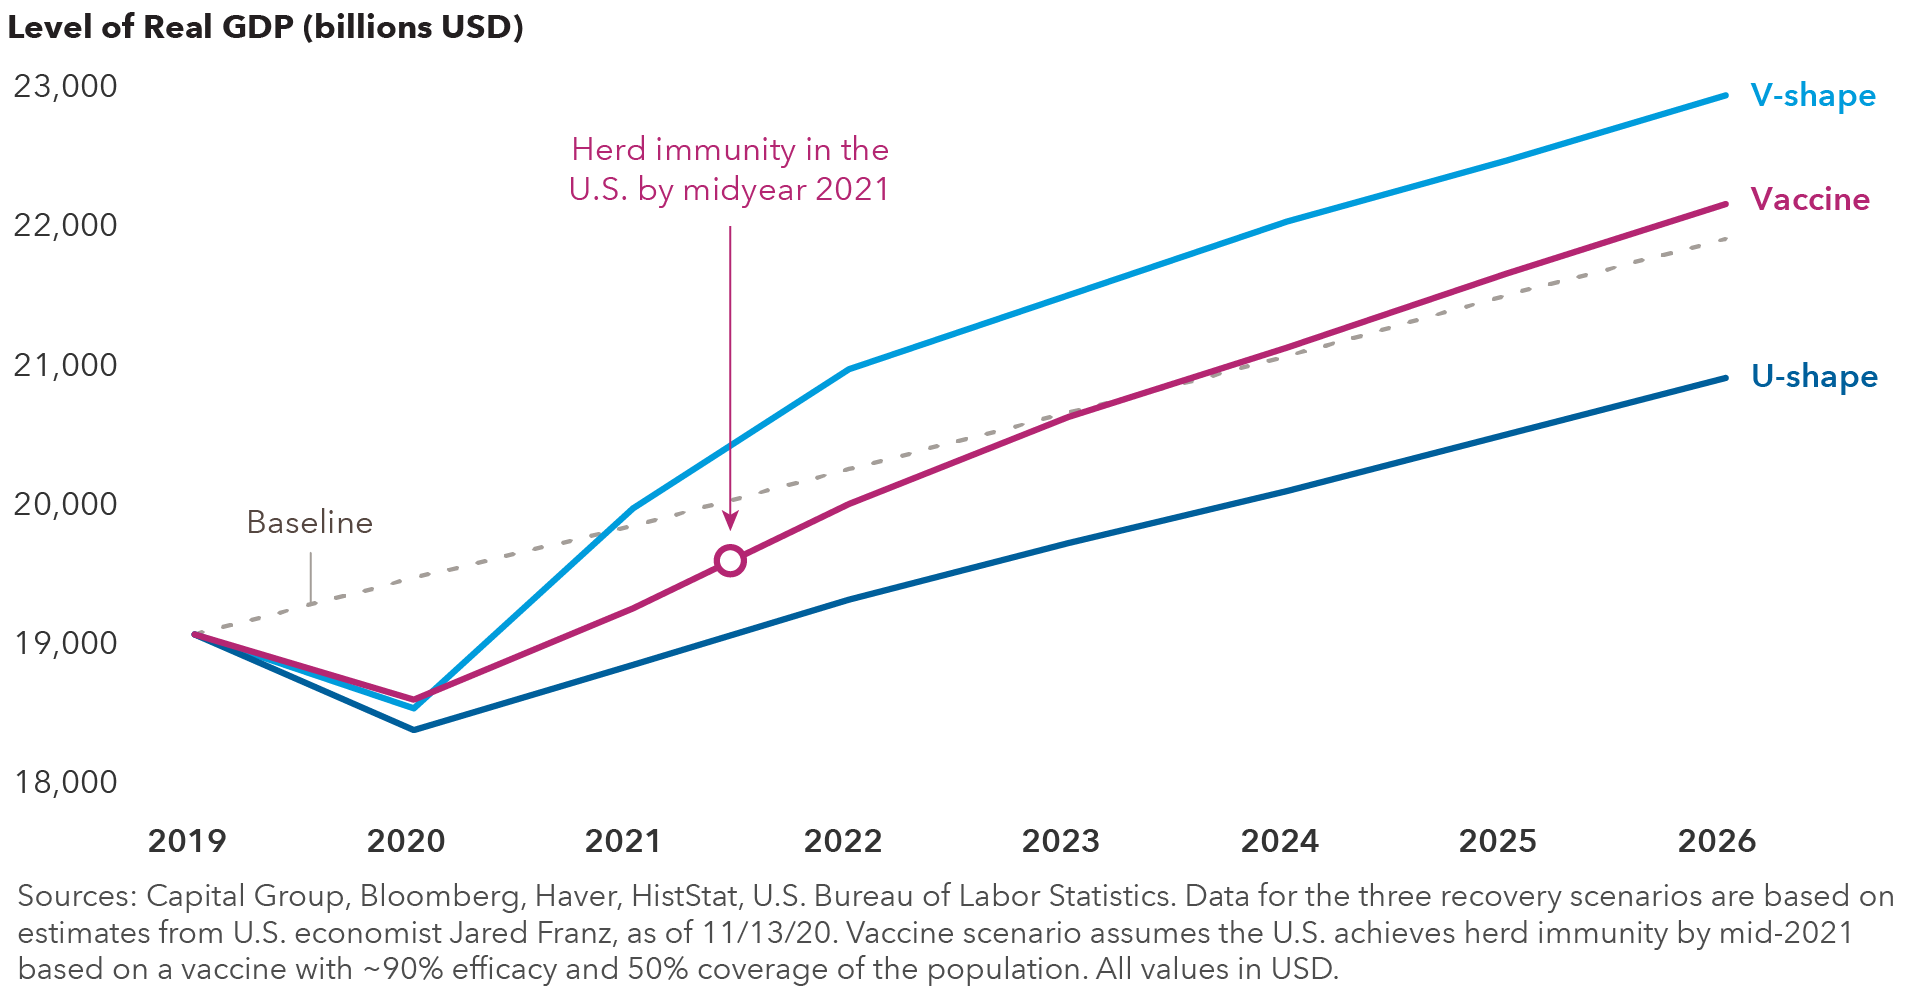 The chart represents U.S. GDP growth from 2019 through 2026, depicting three potential recovery scenarios based on estimates from U.S. economist Jared Franz. A V-shaped recovery scenario depicts a sharp acceleration of growth from the recession in mid-2020 and strong growth in 2021, followed by a solid growth trajectory through 2026. A vaccine recovery scenario shows a more modest rebound in 2021 followed by a solid growth trajectory through 2026. A U-shaped scenario depicts the most modest growth trajectory of the three. All three indicate growth in 2021. GDP growth figures for 2021 through 2026 are estimates. Sources: Capital Group, Bloomberg, Haver, HistStat, U.S. Bureau of Labor Statistics. Data for the three recovery scenarios are based on estimates from U.S. economist Jared Franz, as of November 13, 2020. Vaccine scenario assumes the U.S. achieves herd immunity by mid-2021 based on a vaccine with ~90% efficacy and 50% coverage of the population. All values in USD.